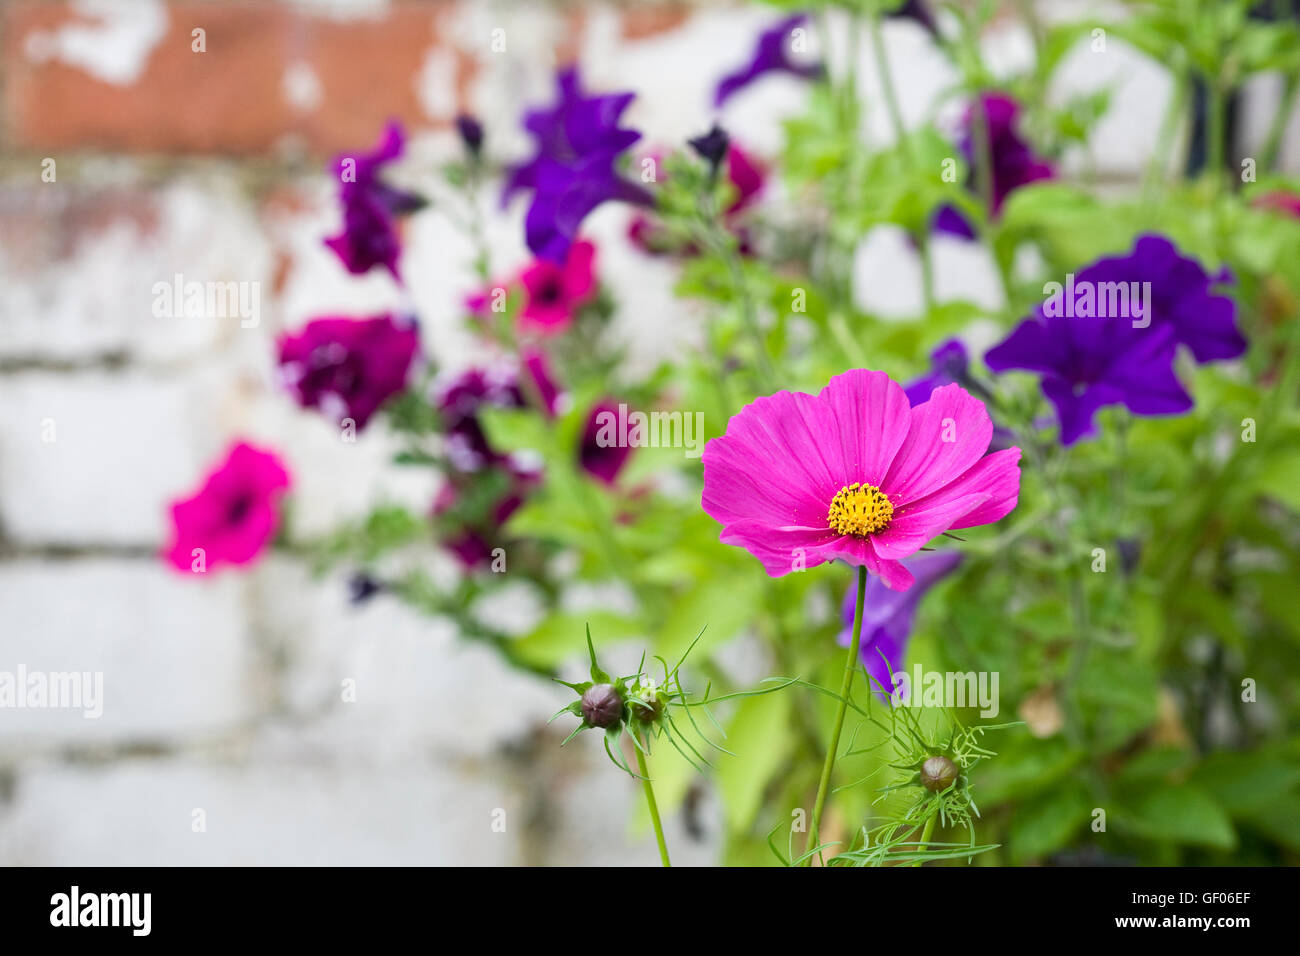 Cosmos flower in front of Petunias in a hanging basket. Stock Photo